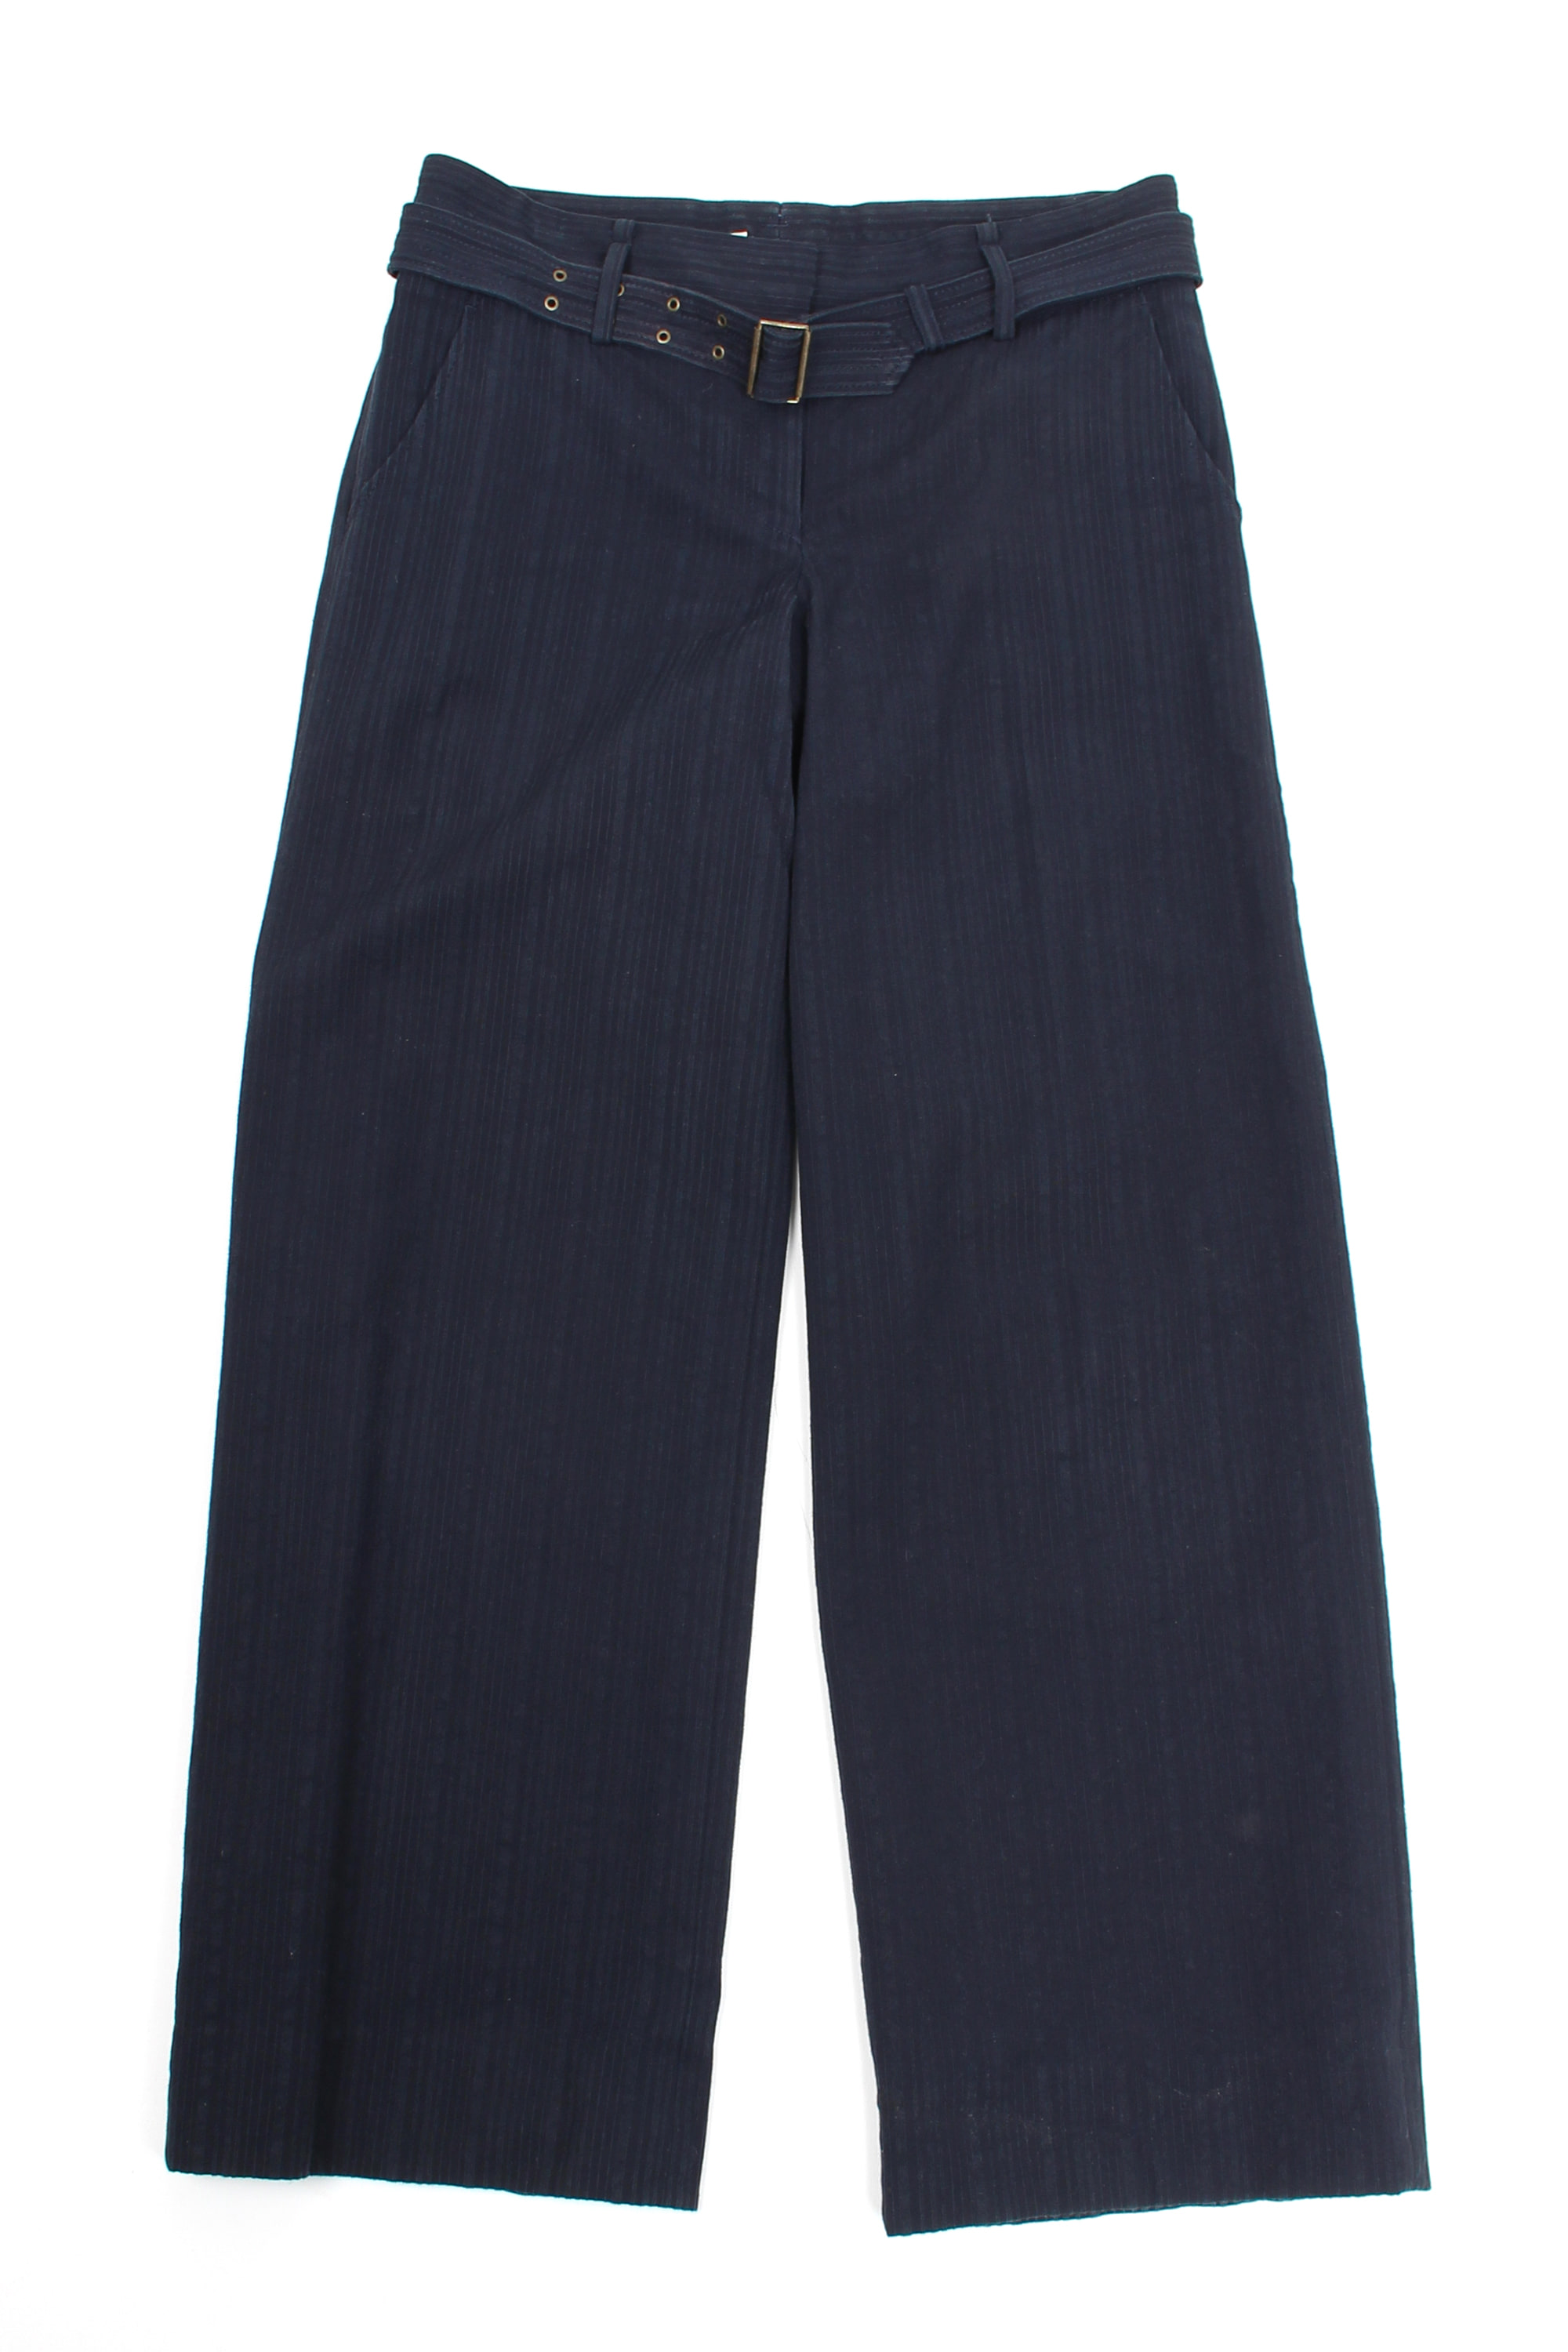 United Arrows United Arrows Work For Holiday Belted Pants